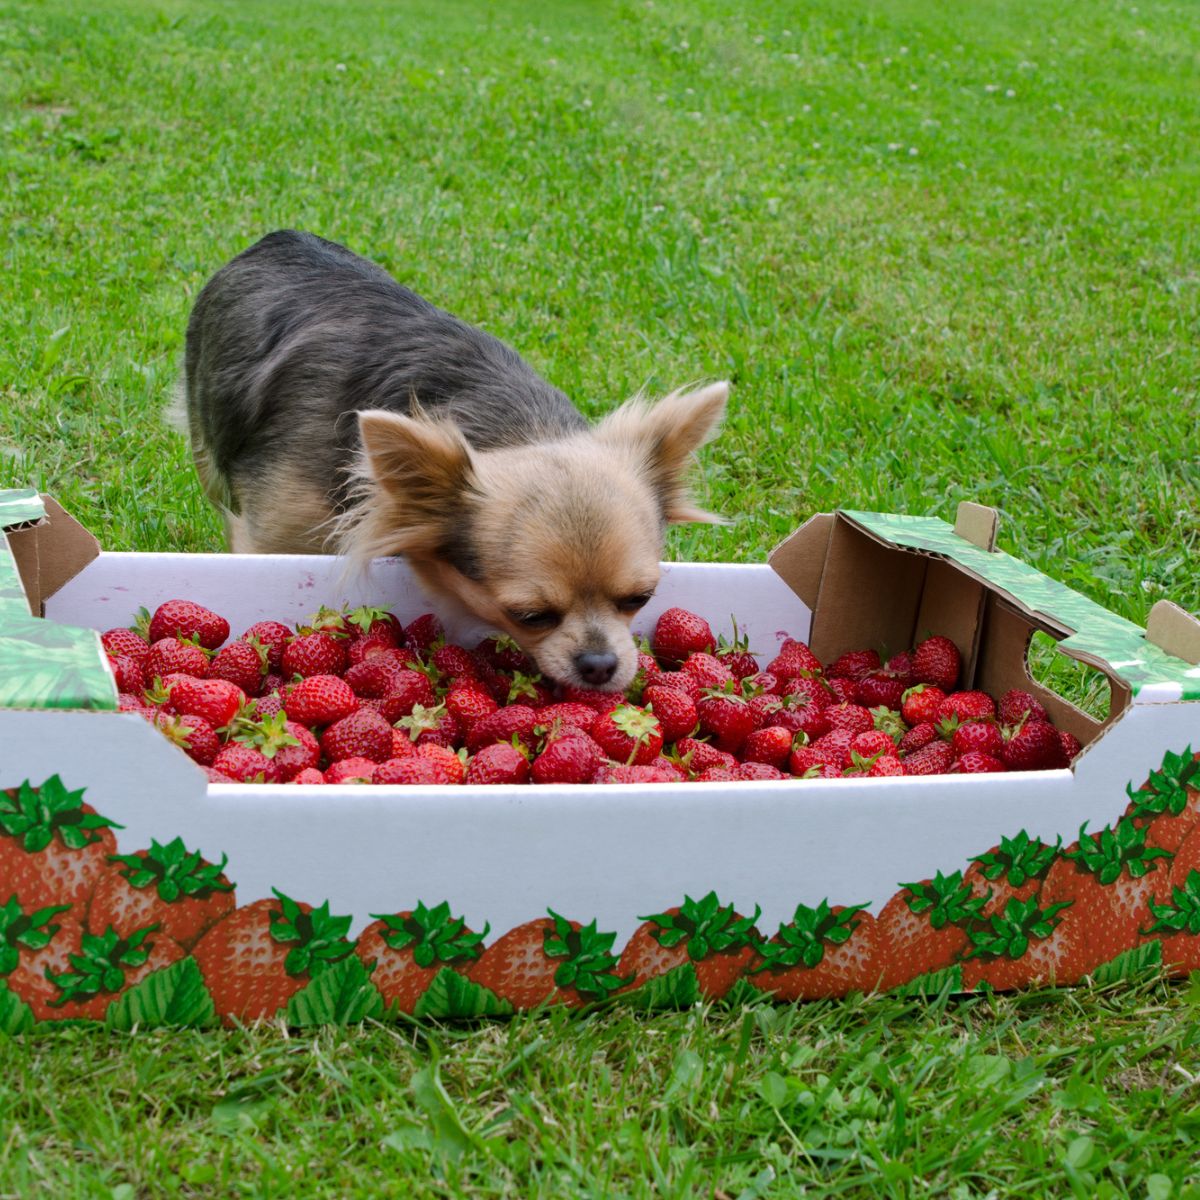 are strawberries good for dogs